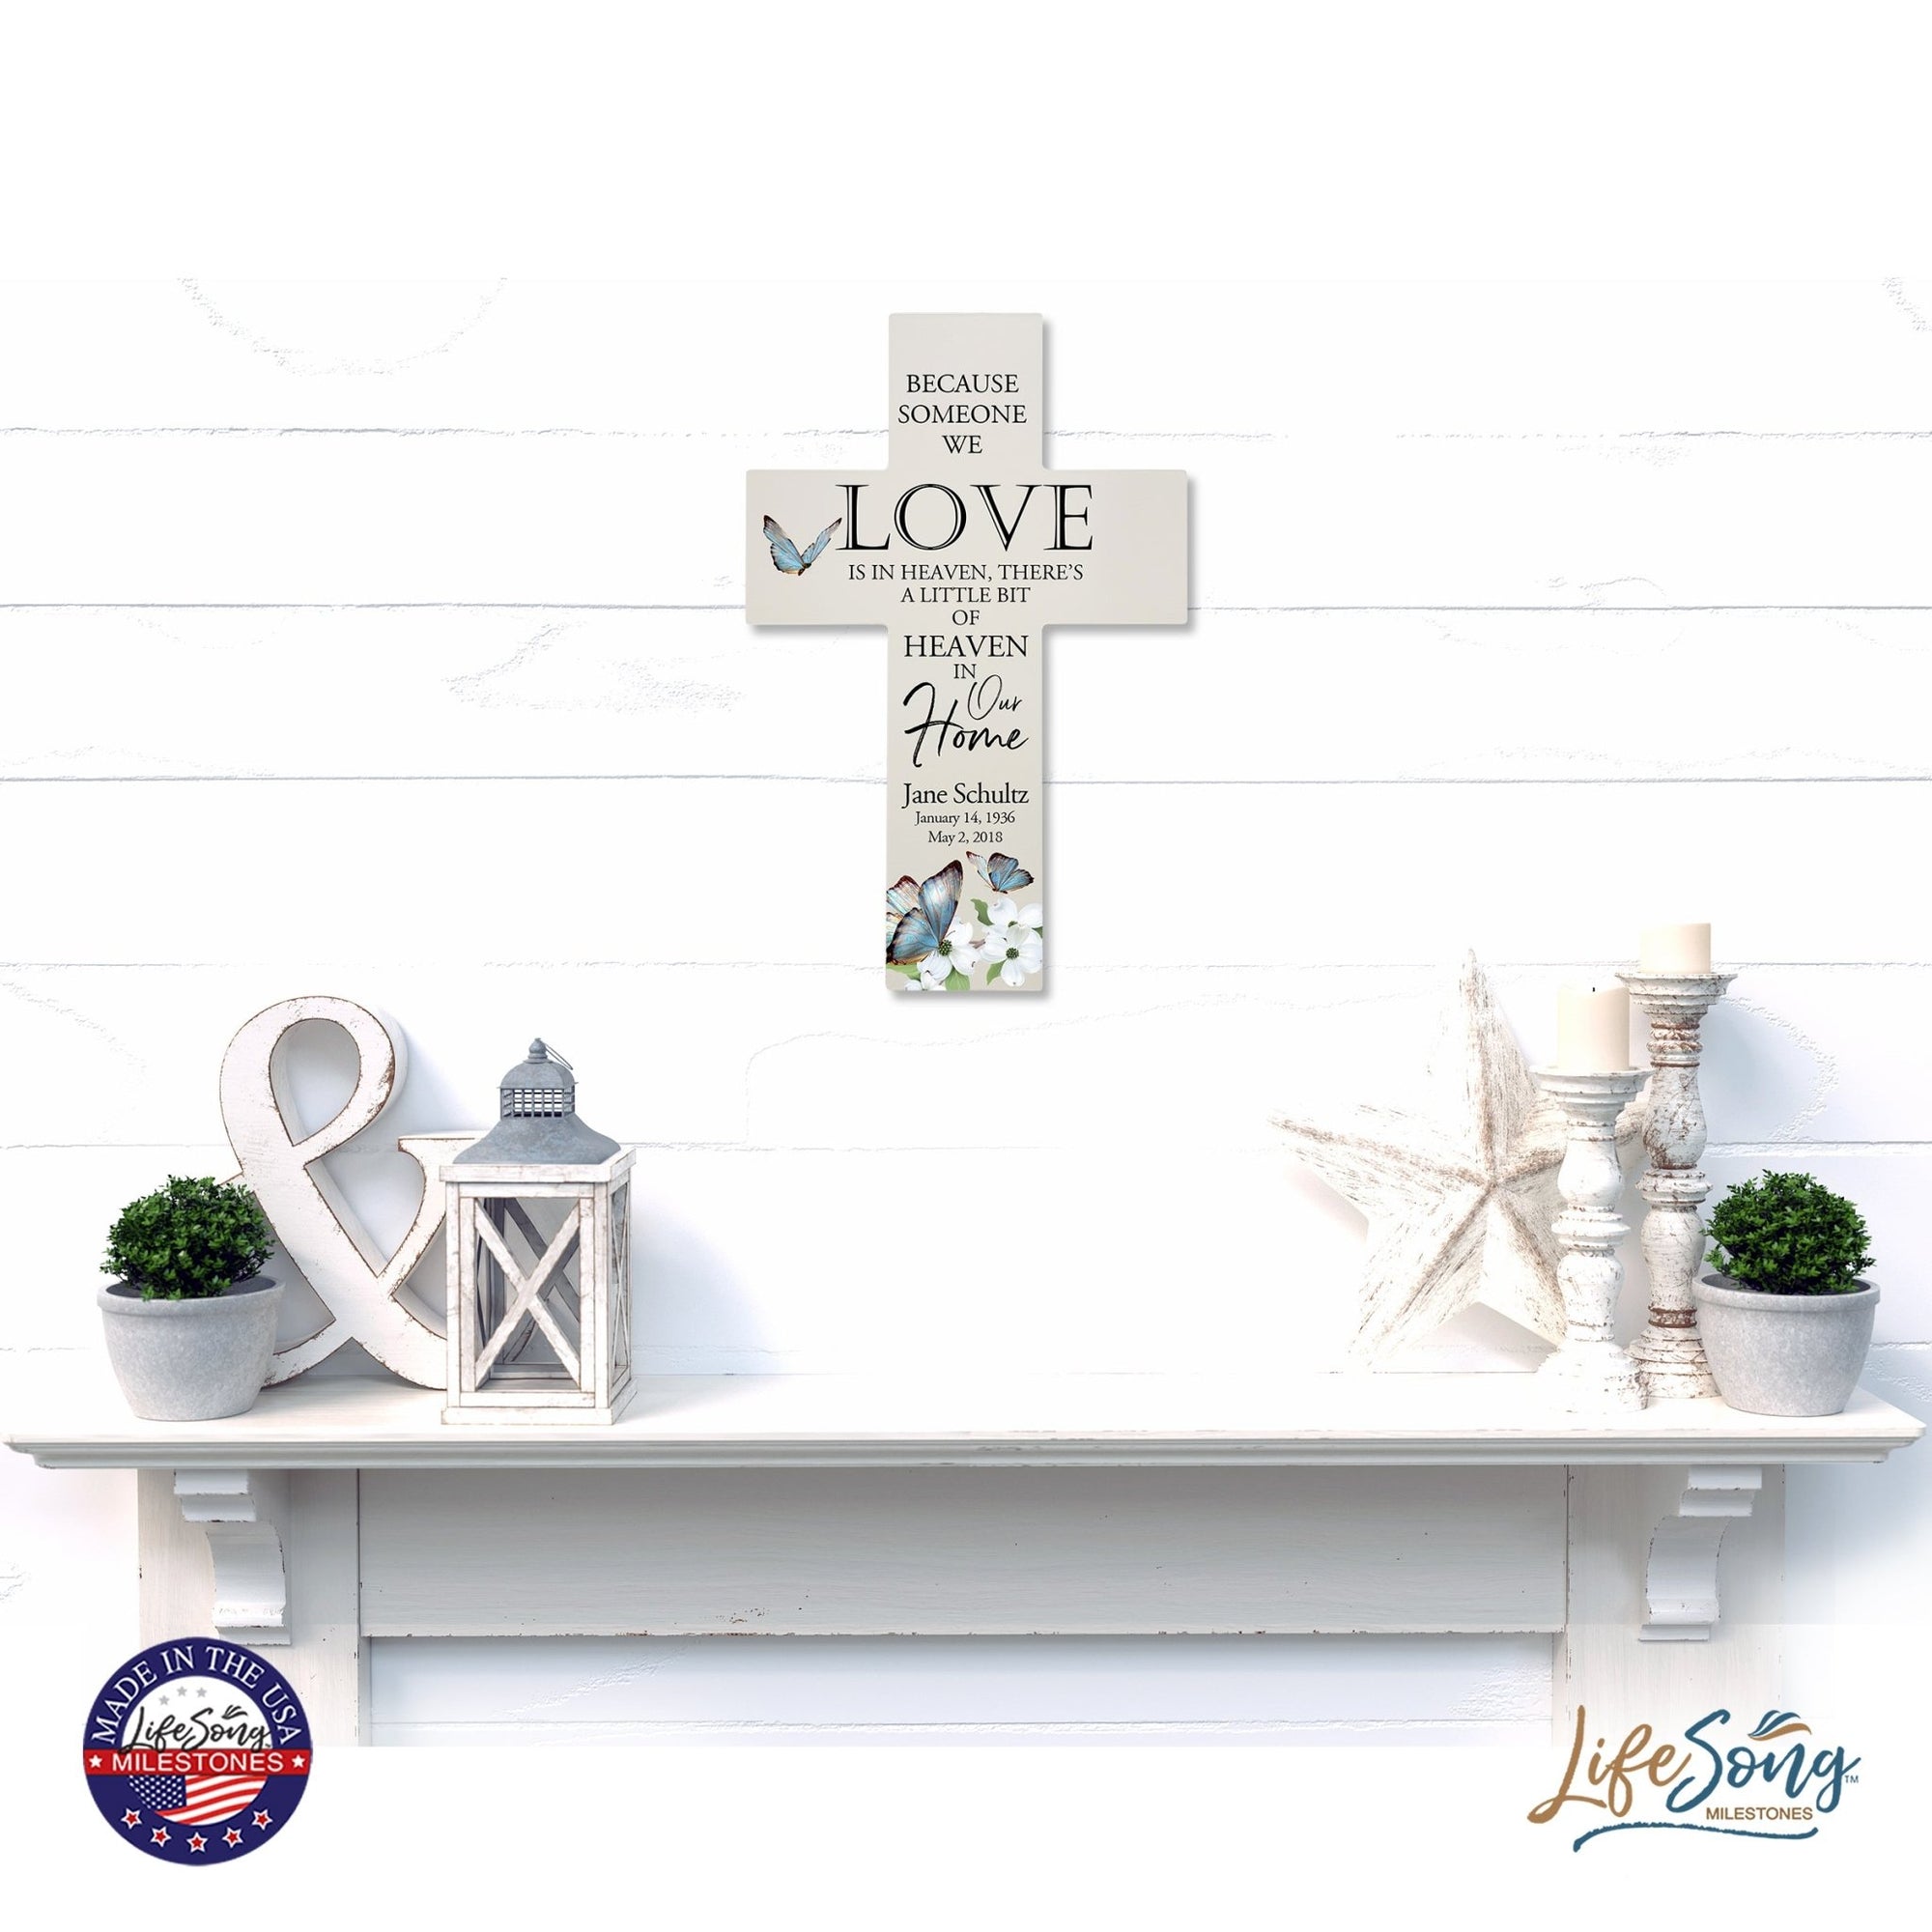 Personalized Butterfly Memorial Bereavement Wall Cross For Loss of Loved One Because Someone We Love (Butterfly) Quote 14 x 9.25 Because Someone We Love Is In Heaven, There's A Little Bit Of Heaven In Our Home - LifeSong Milestones